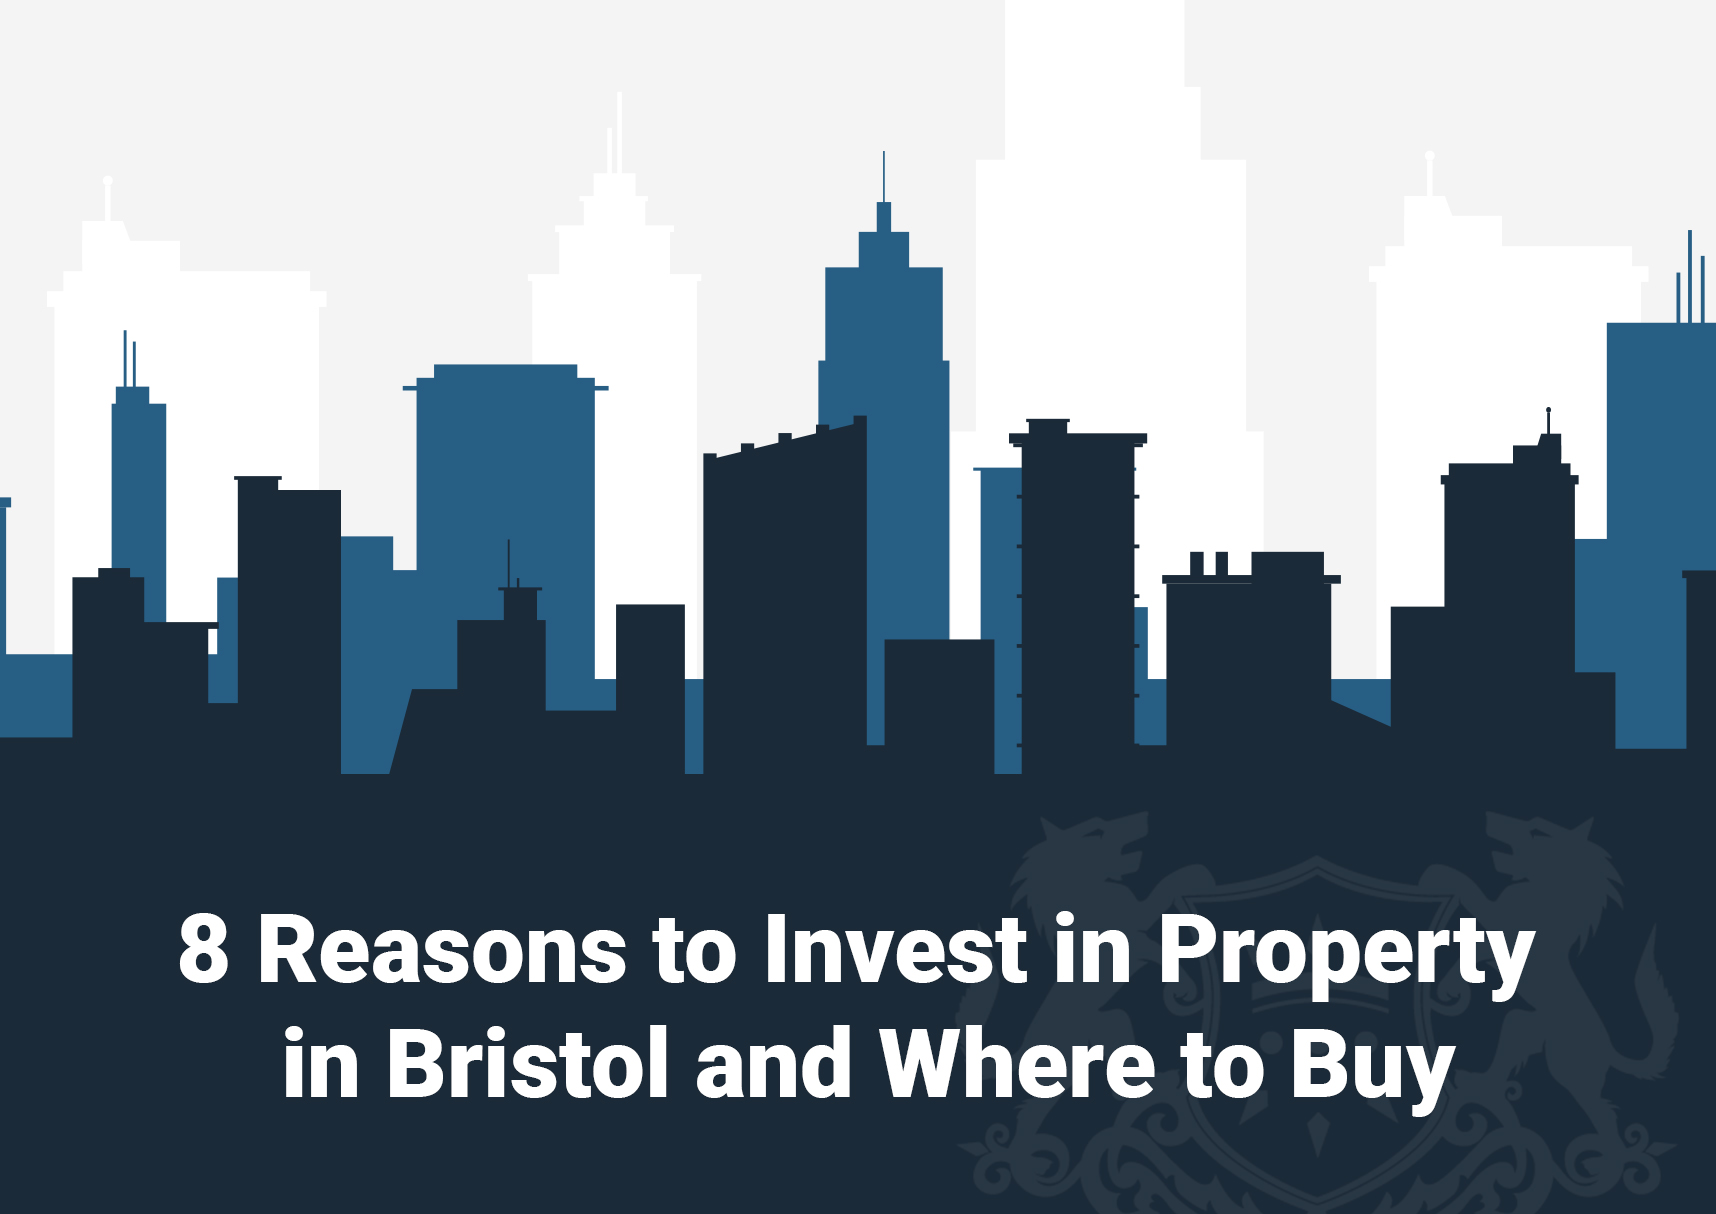 8 Reasons to Invest in Property in Bristol and Where to Buy